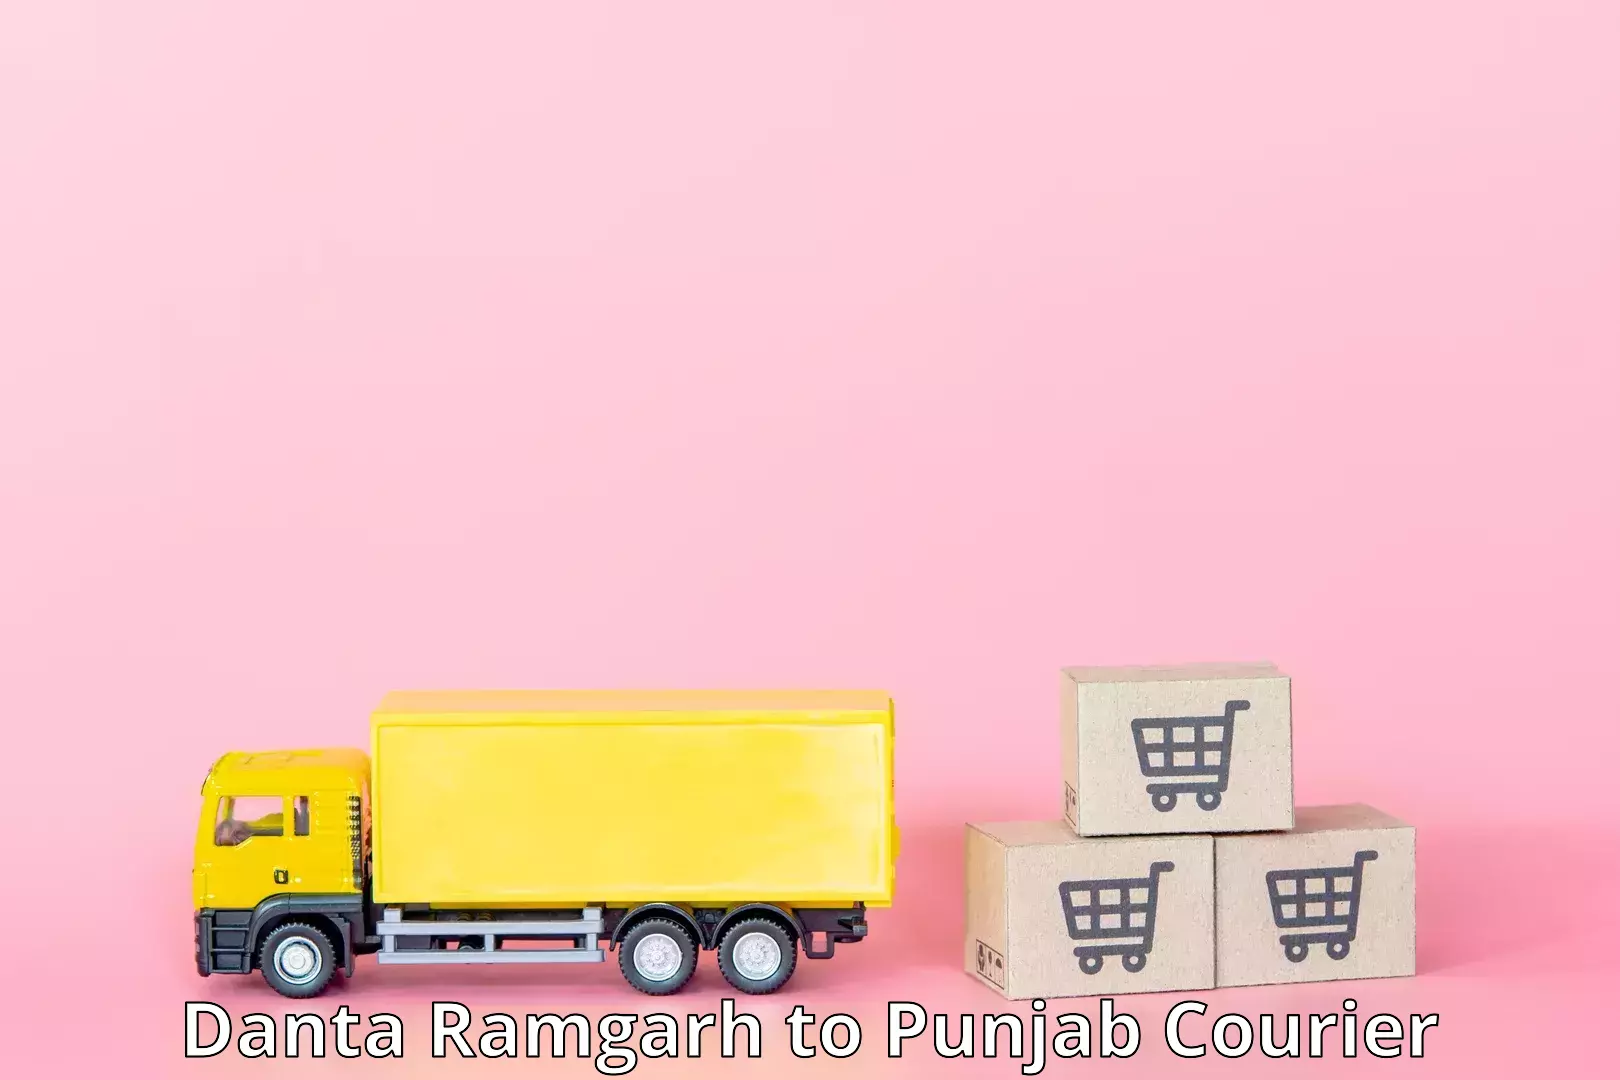 Efficient parcel transport Danta Ramgarh to Malout